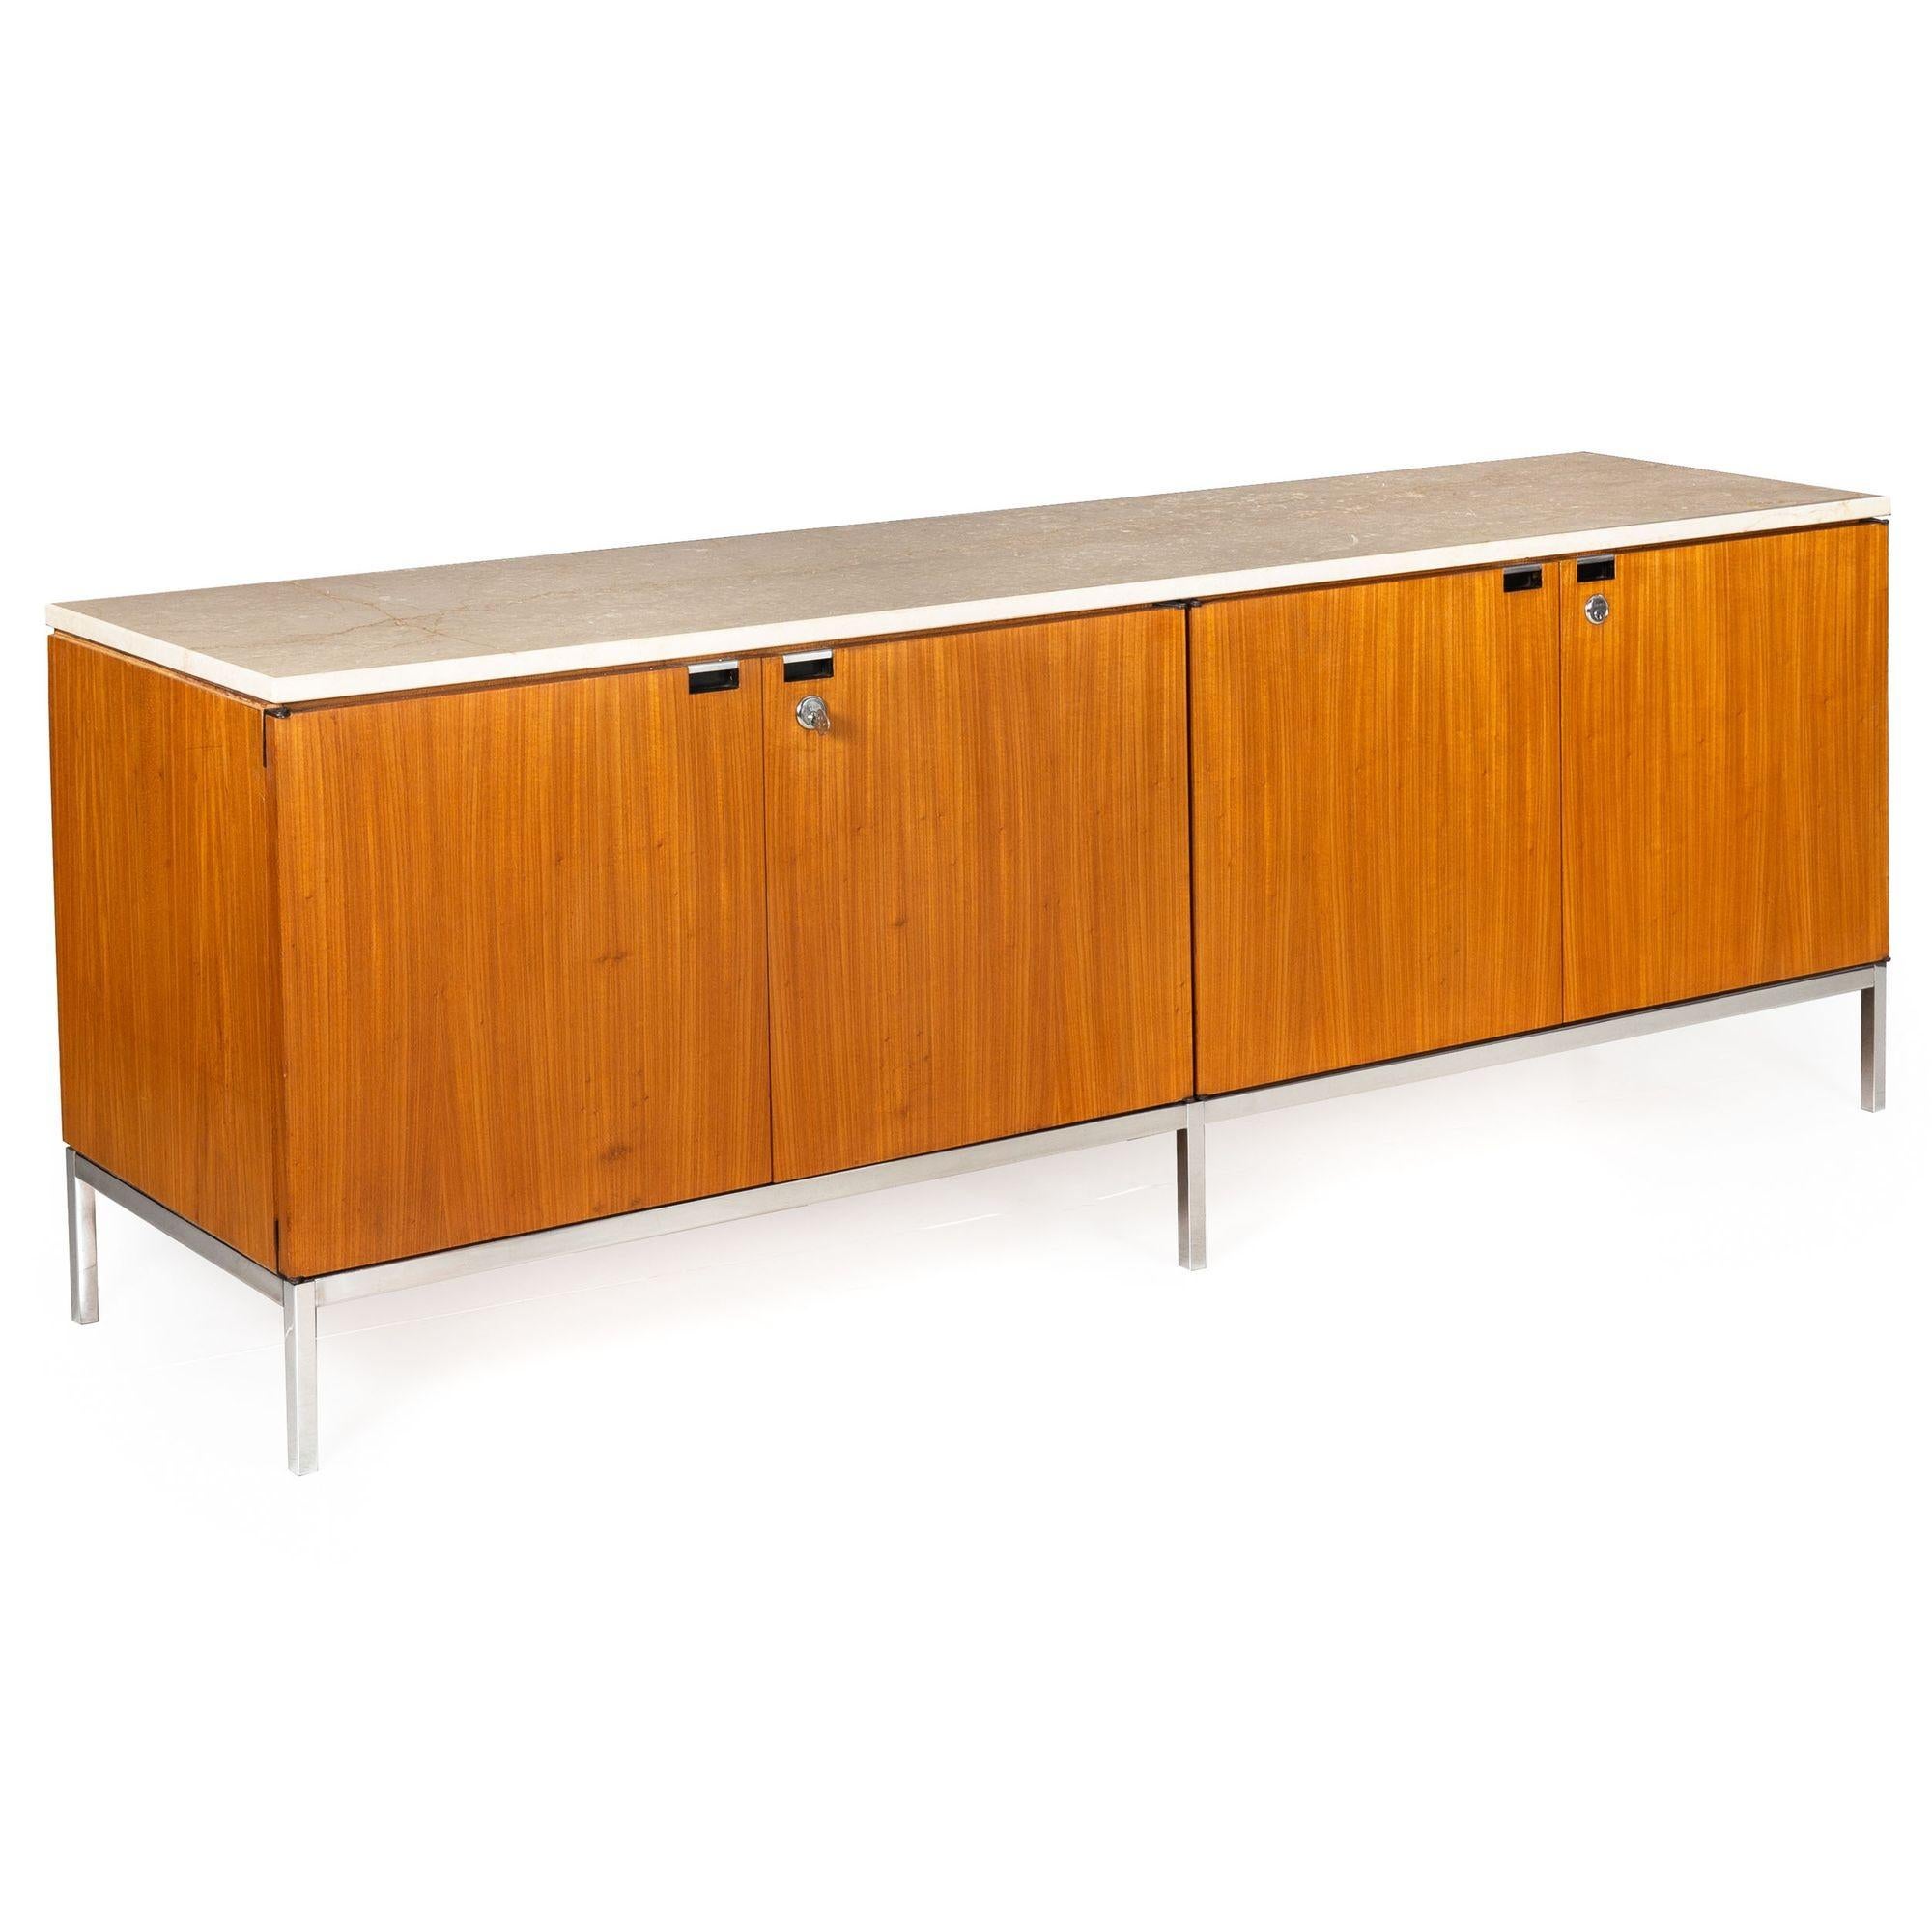 A very nice double-credenza designed and retailed by Knoll, it features a polished marble top (with repaired crack) over an all-over teak facade raised on polished chrome legs. The doors open to reveal a shelved interior. Versions of this cabinet